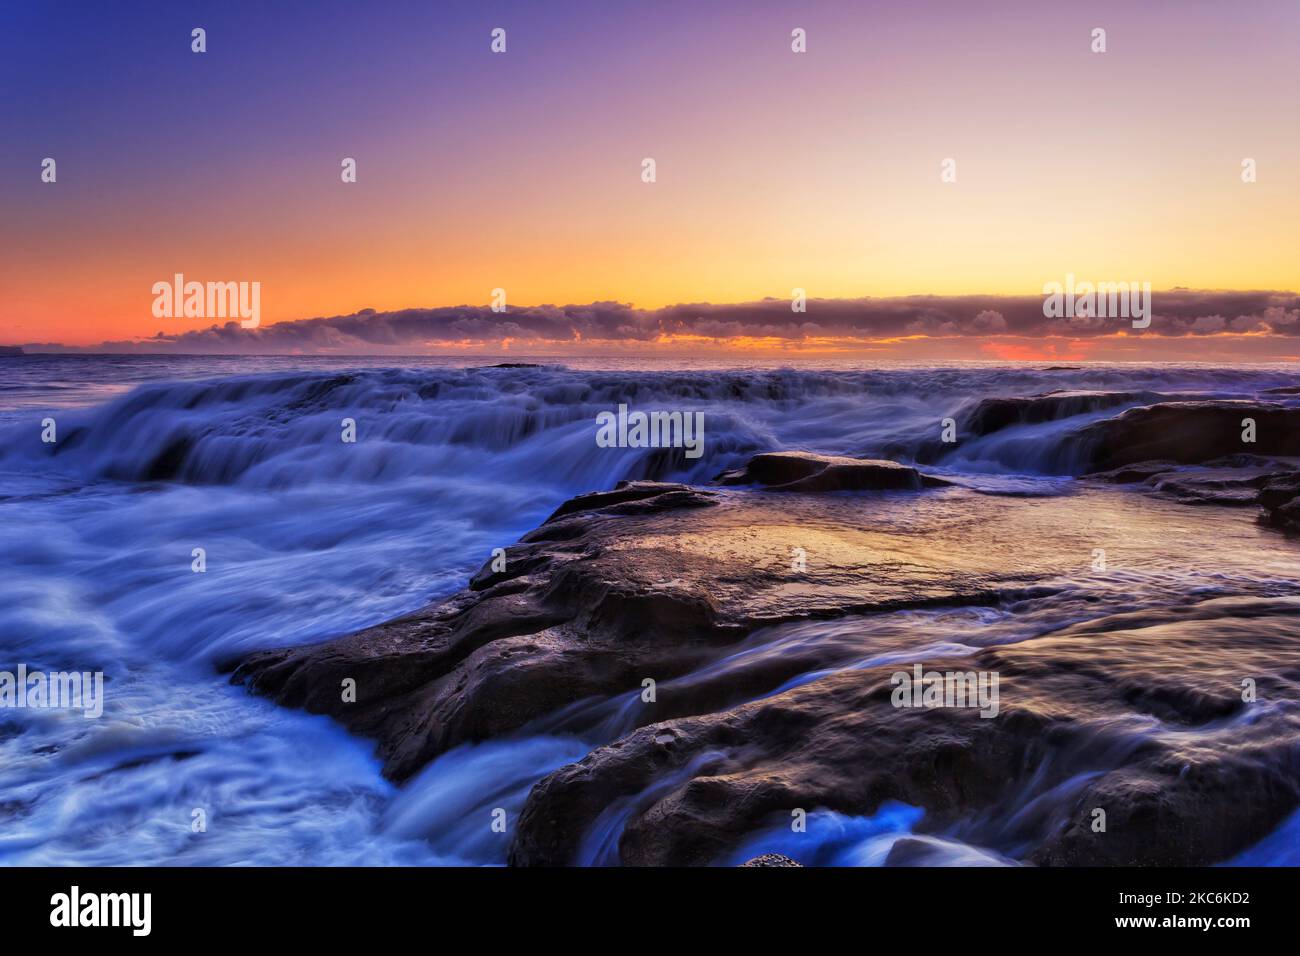 Scenic colourful seascape sunrise at Whale beach of Sydney Pacific ocean coast at Northern Beaches. Stock Photo